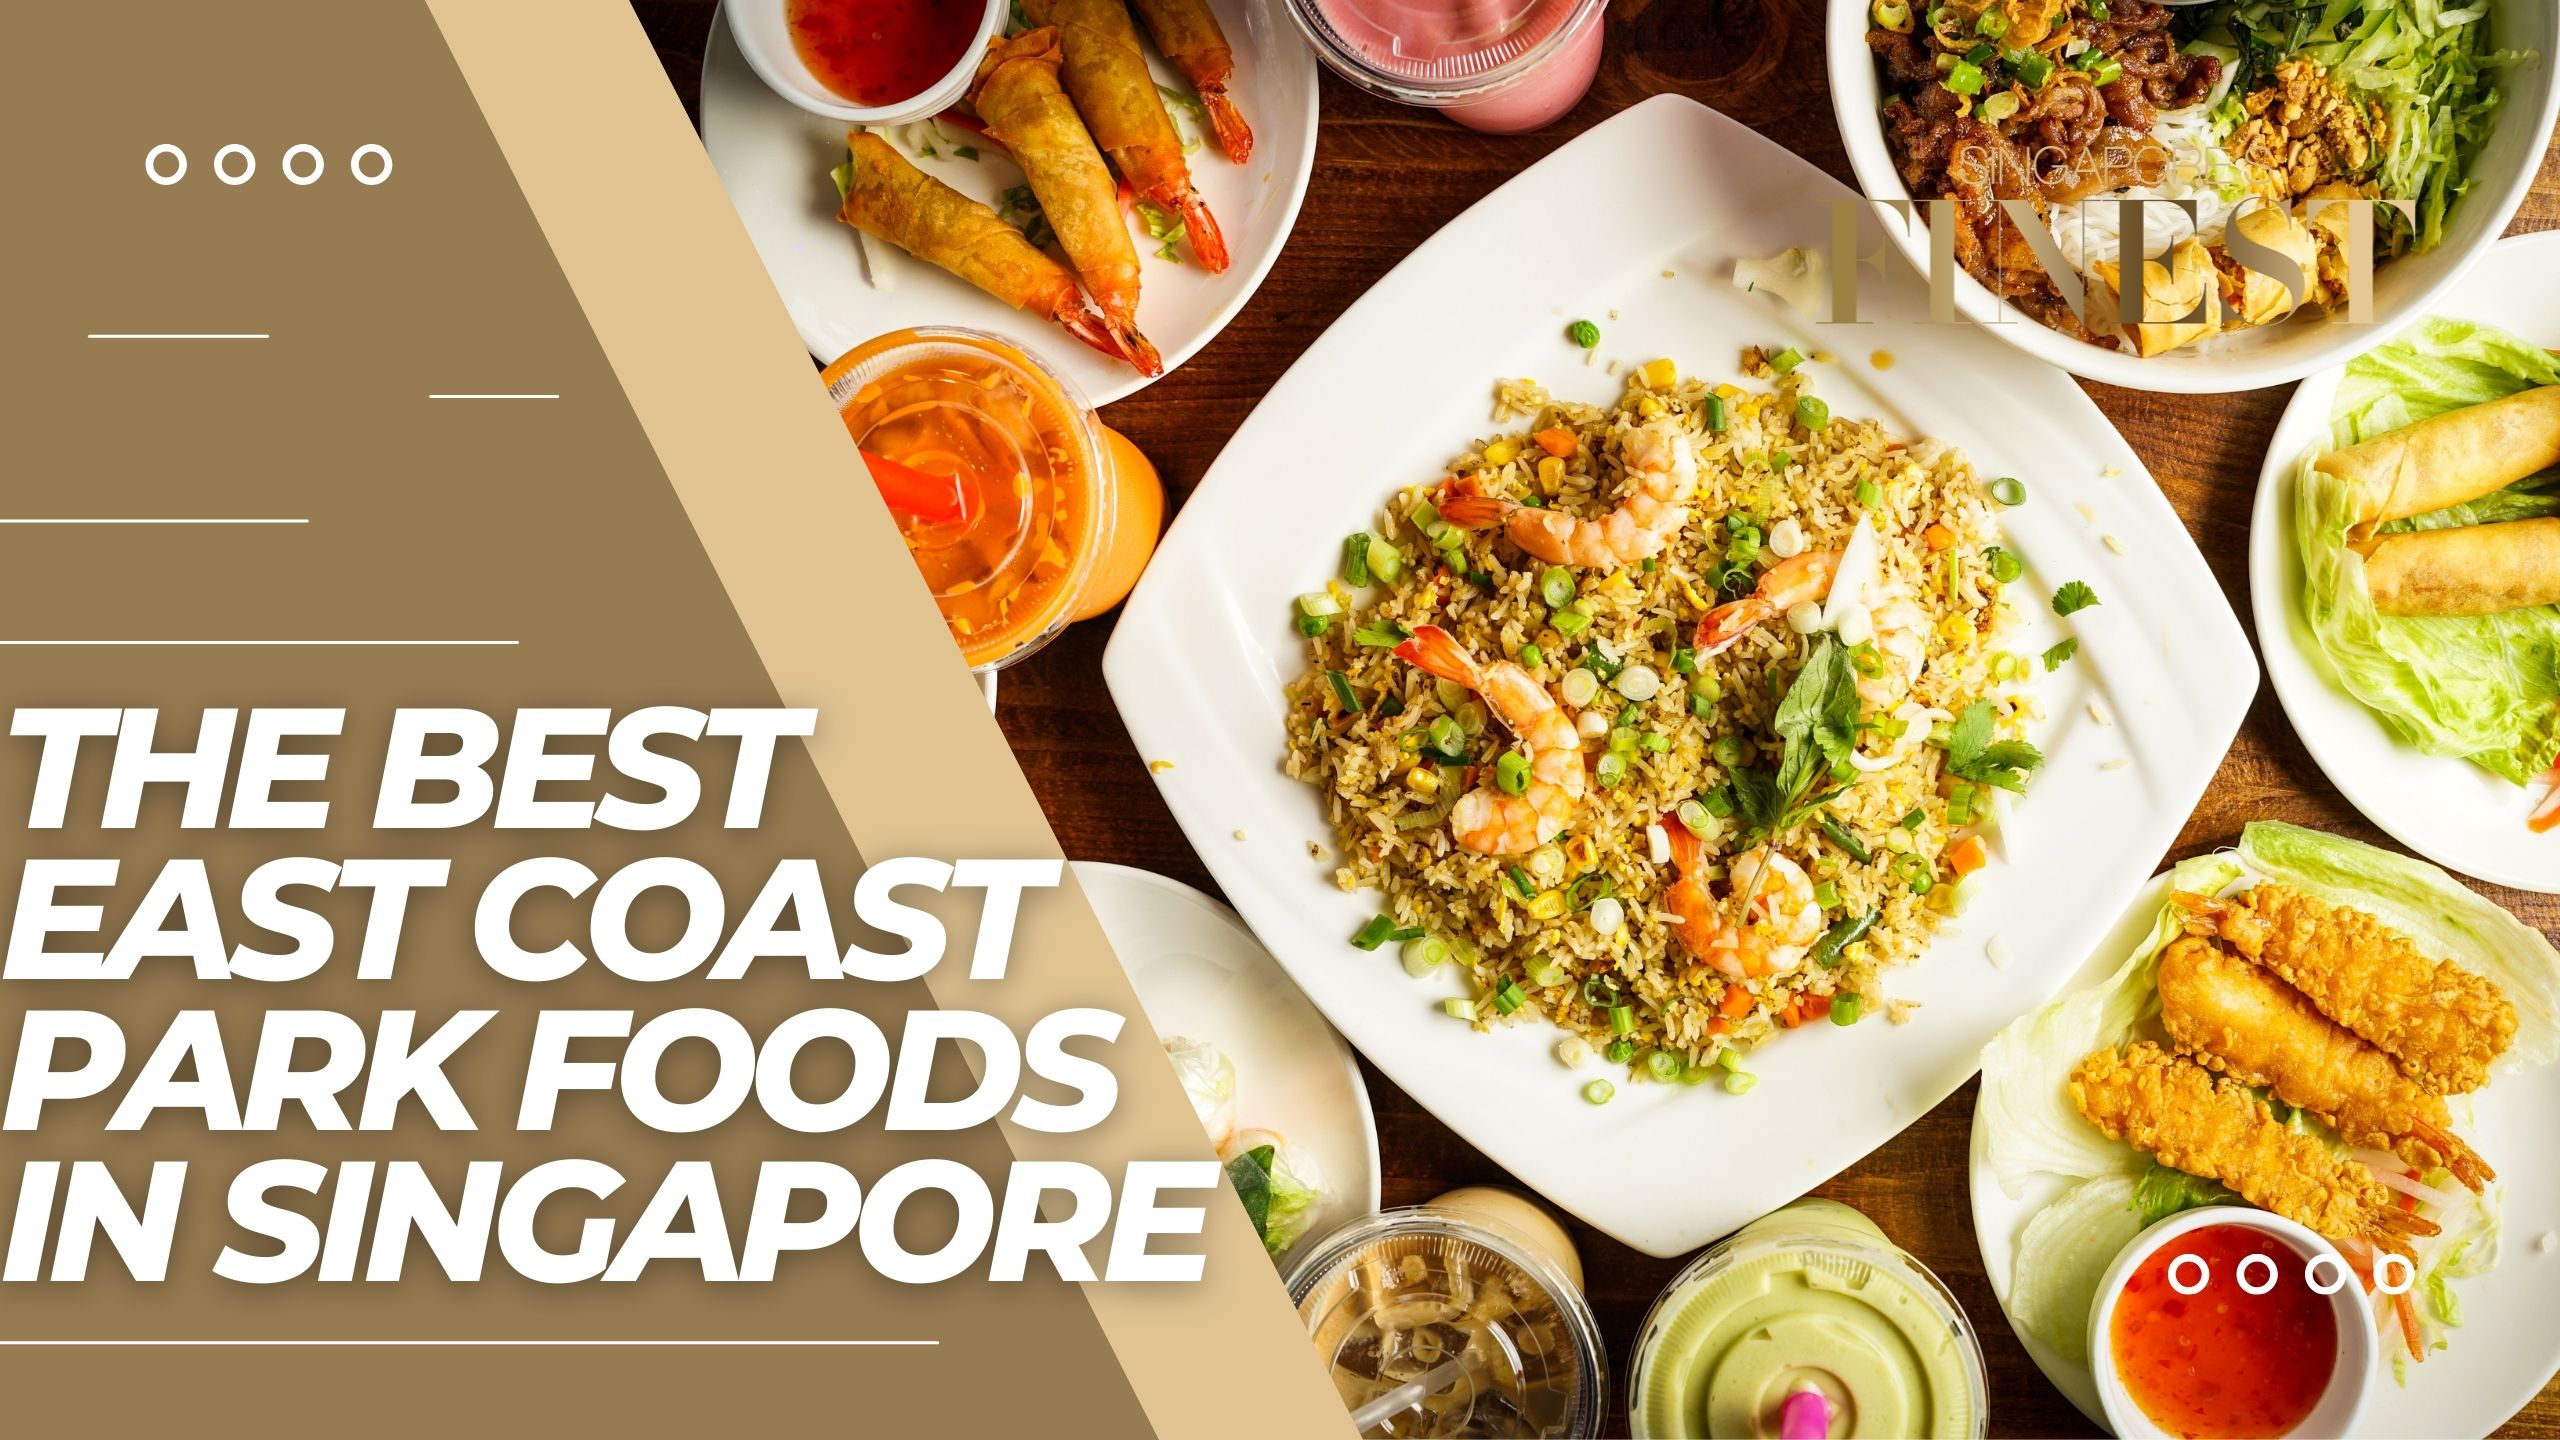 The Finest East Coast Park Food in Singapore